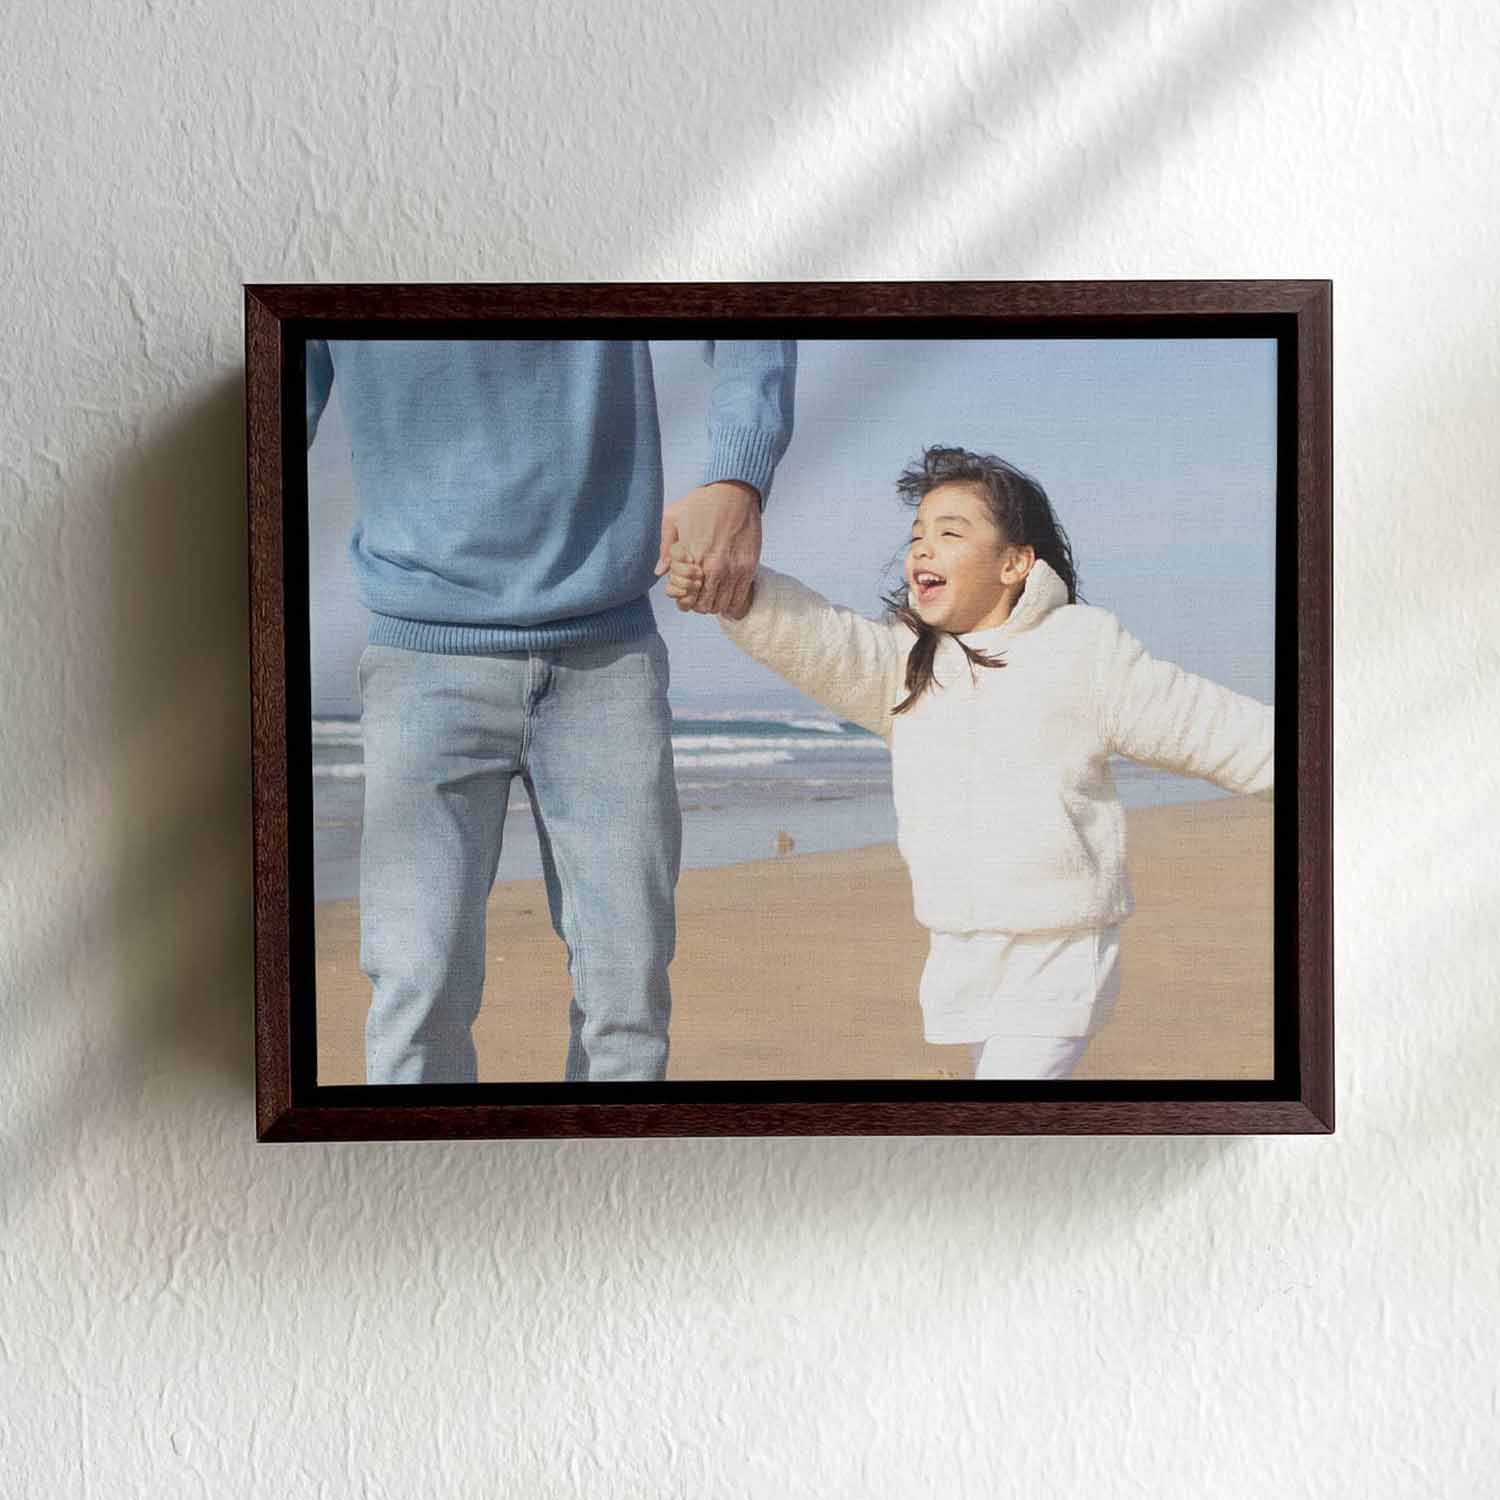 Framed canvas prints make a statement on your wall.